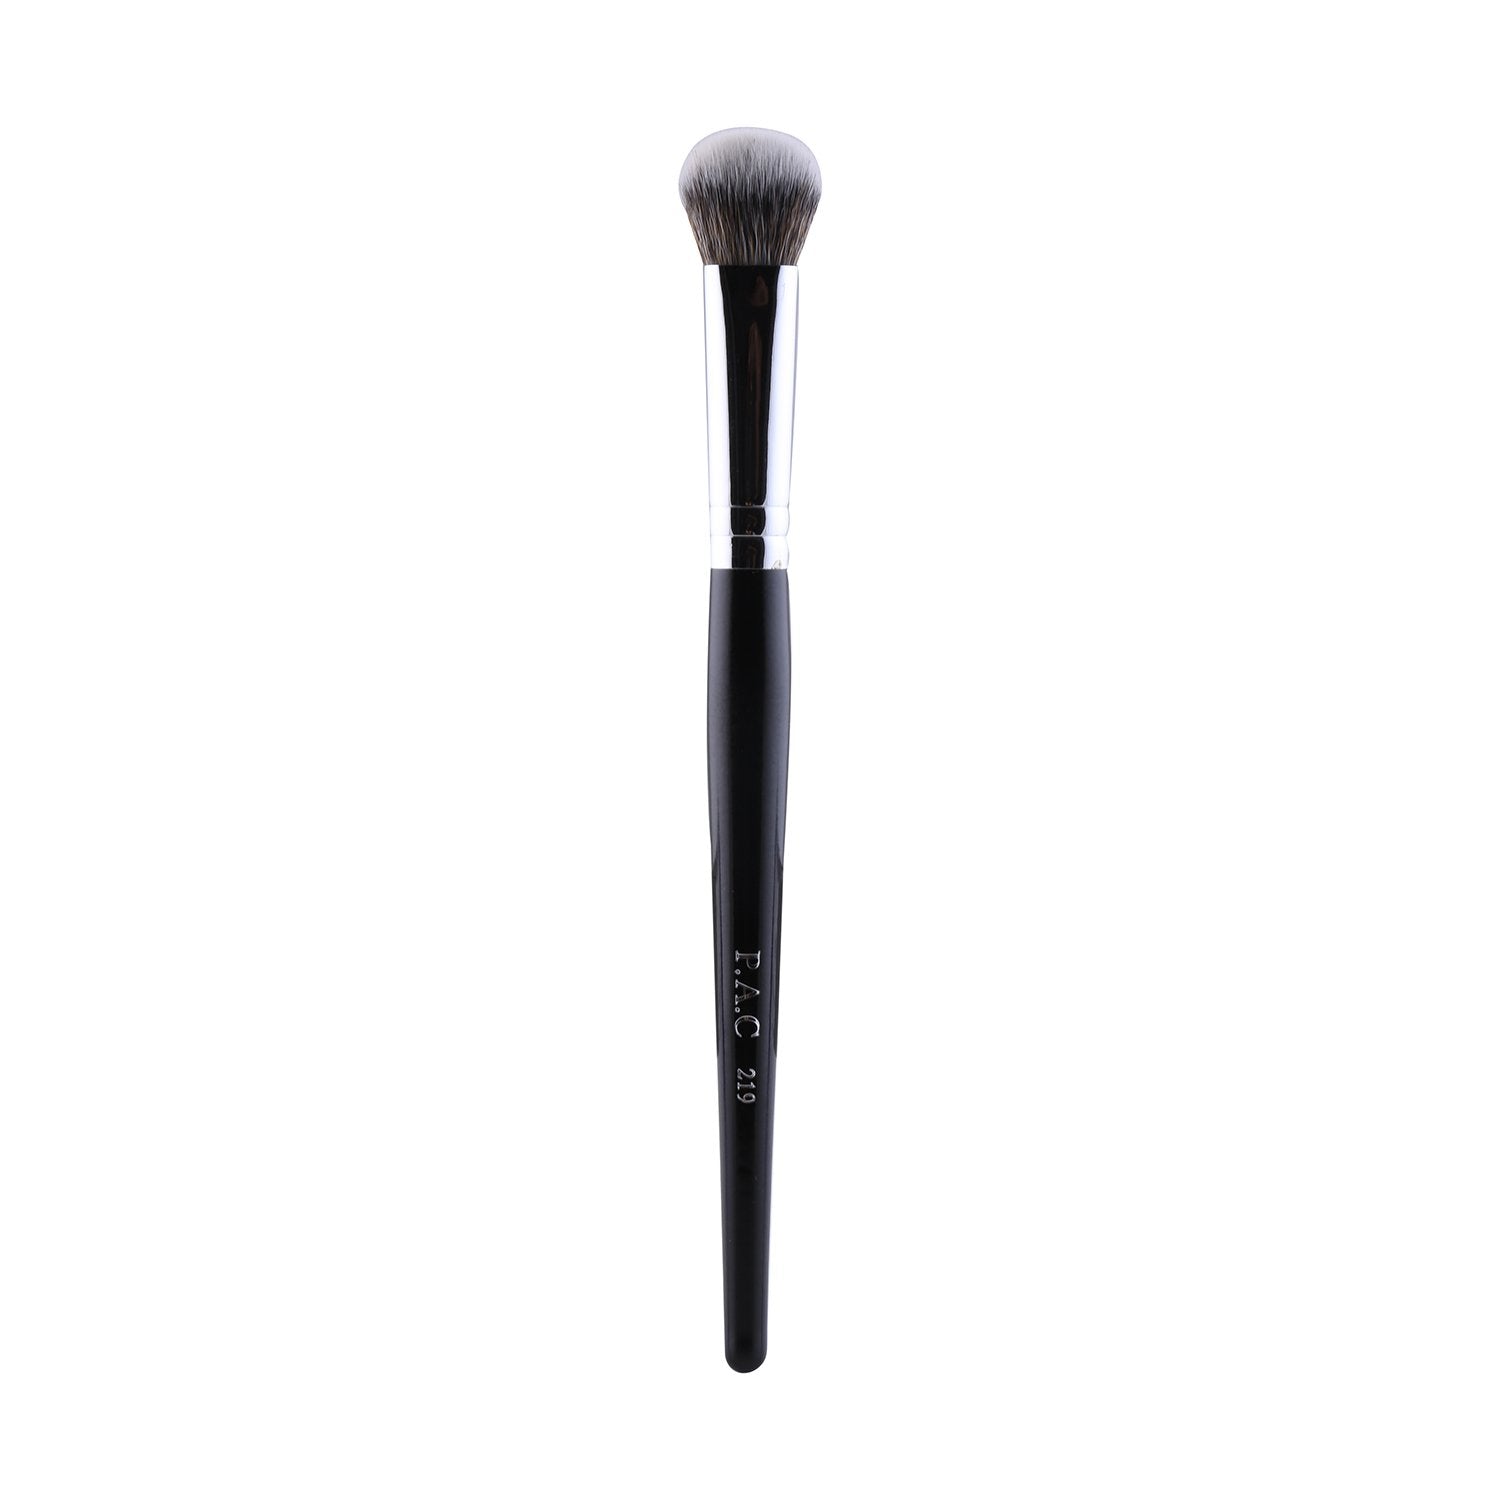 PAC Concealer Brush 219 PAC